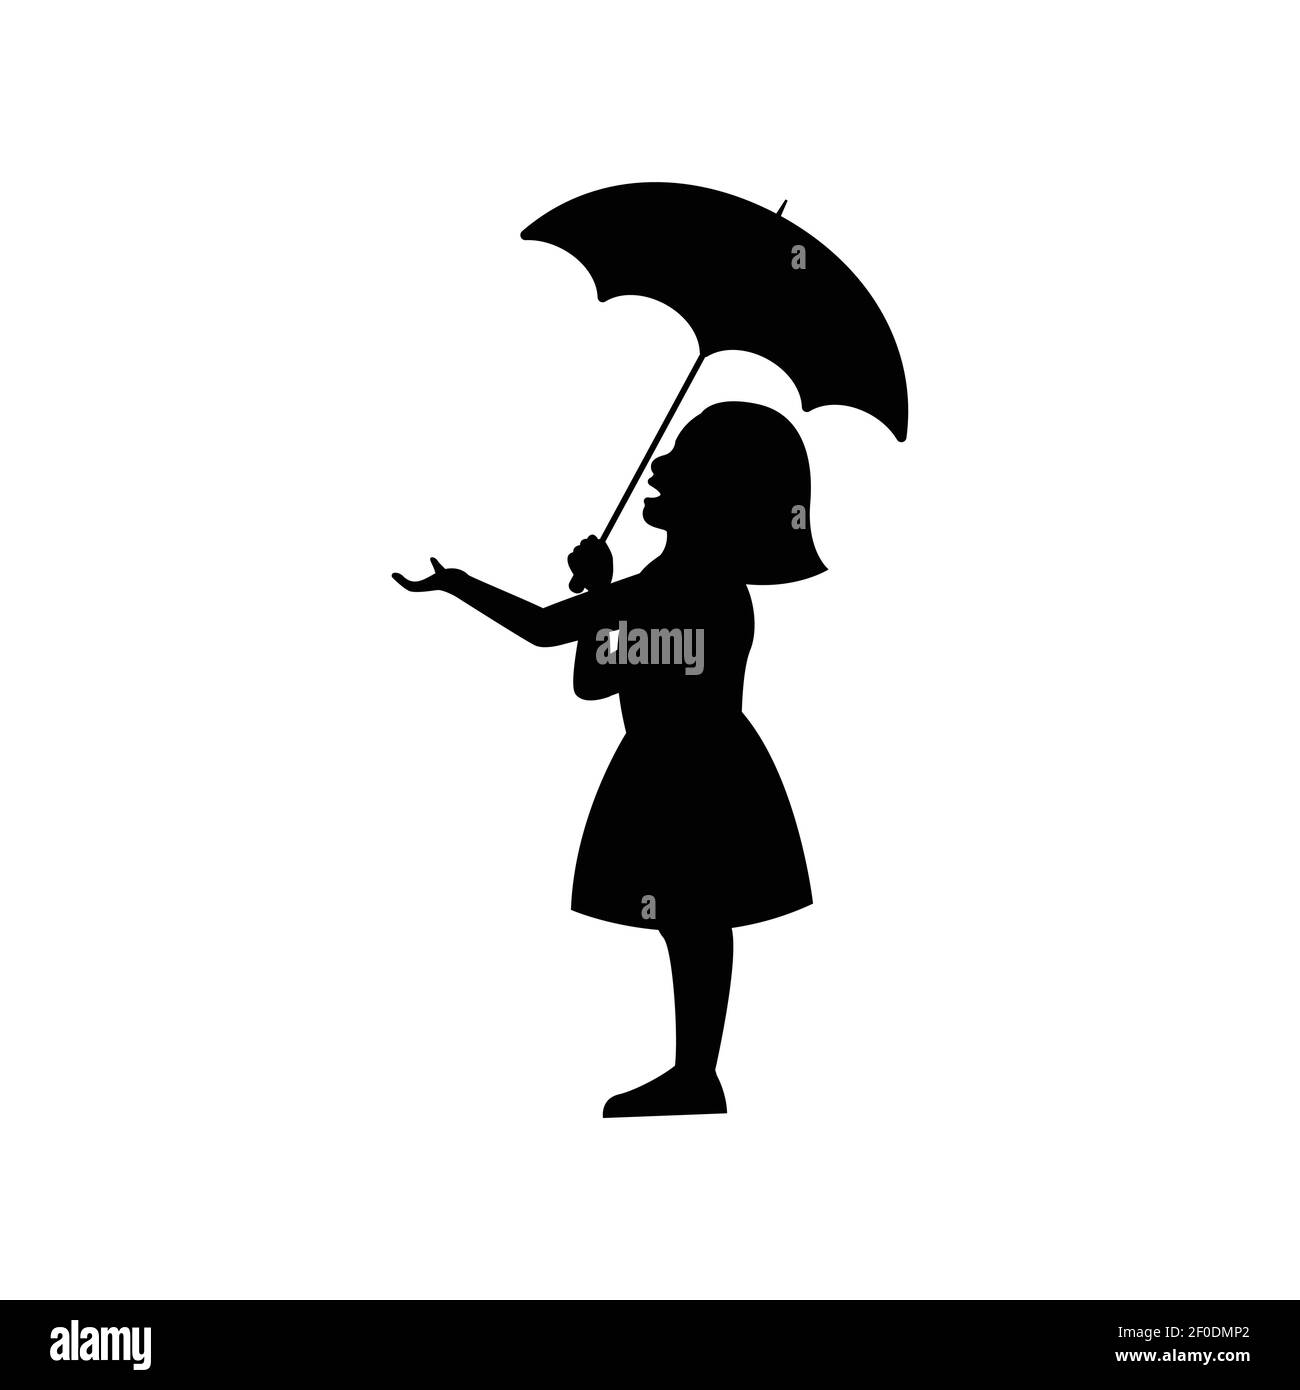 girl and boy with umbrella silhouette